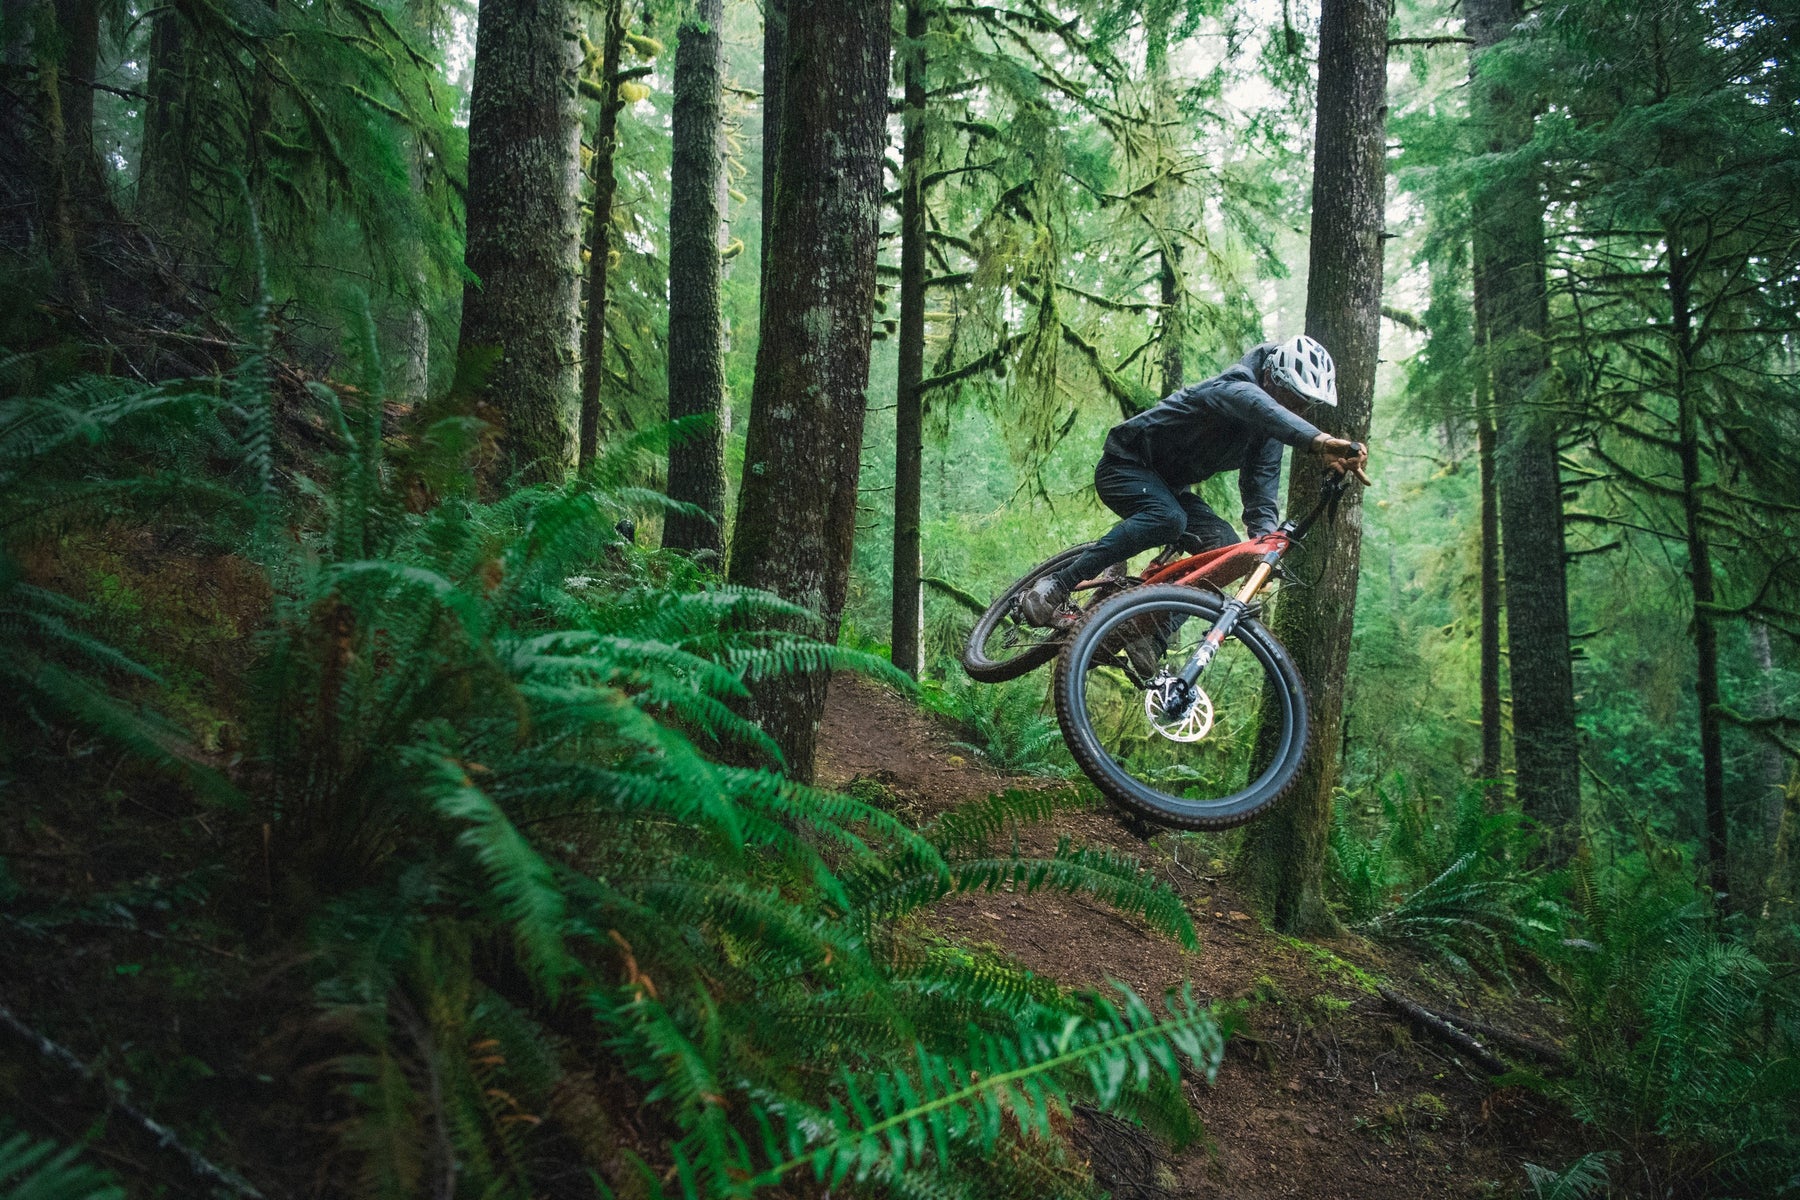 The Unbelievable Power to Ride More Trails